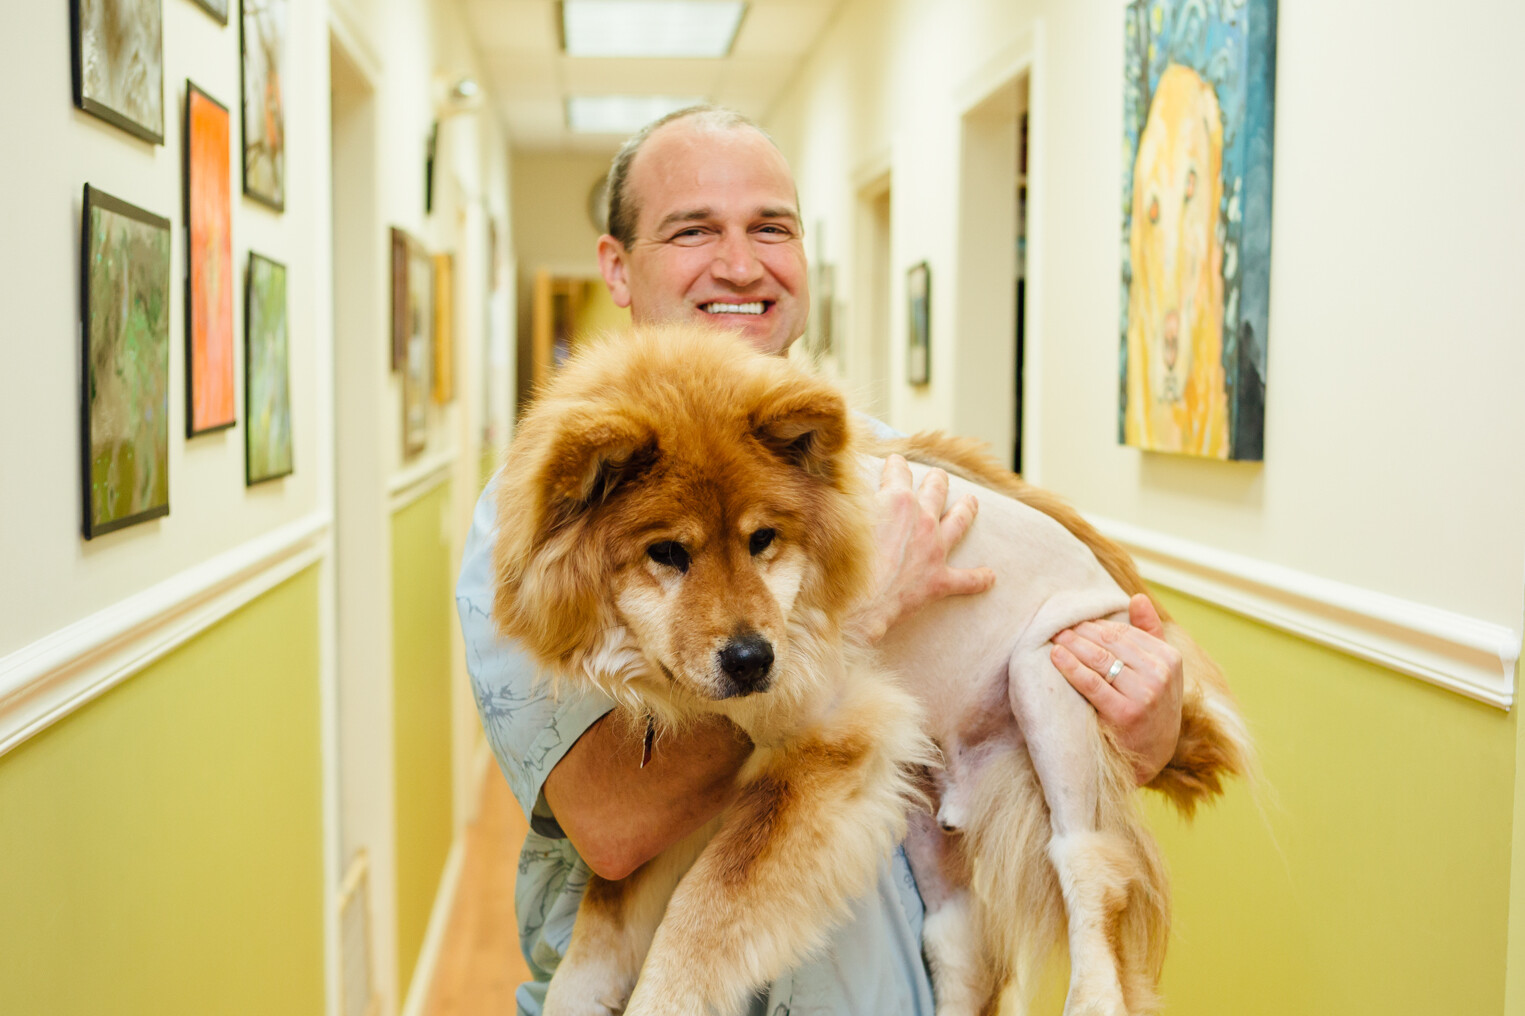 Dr. Nate Holding a Dog in the Clinic Hallway